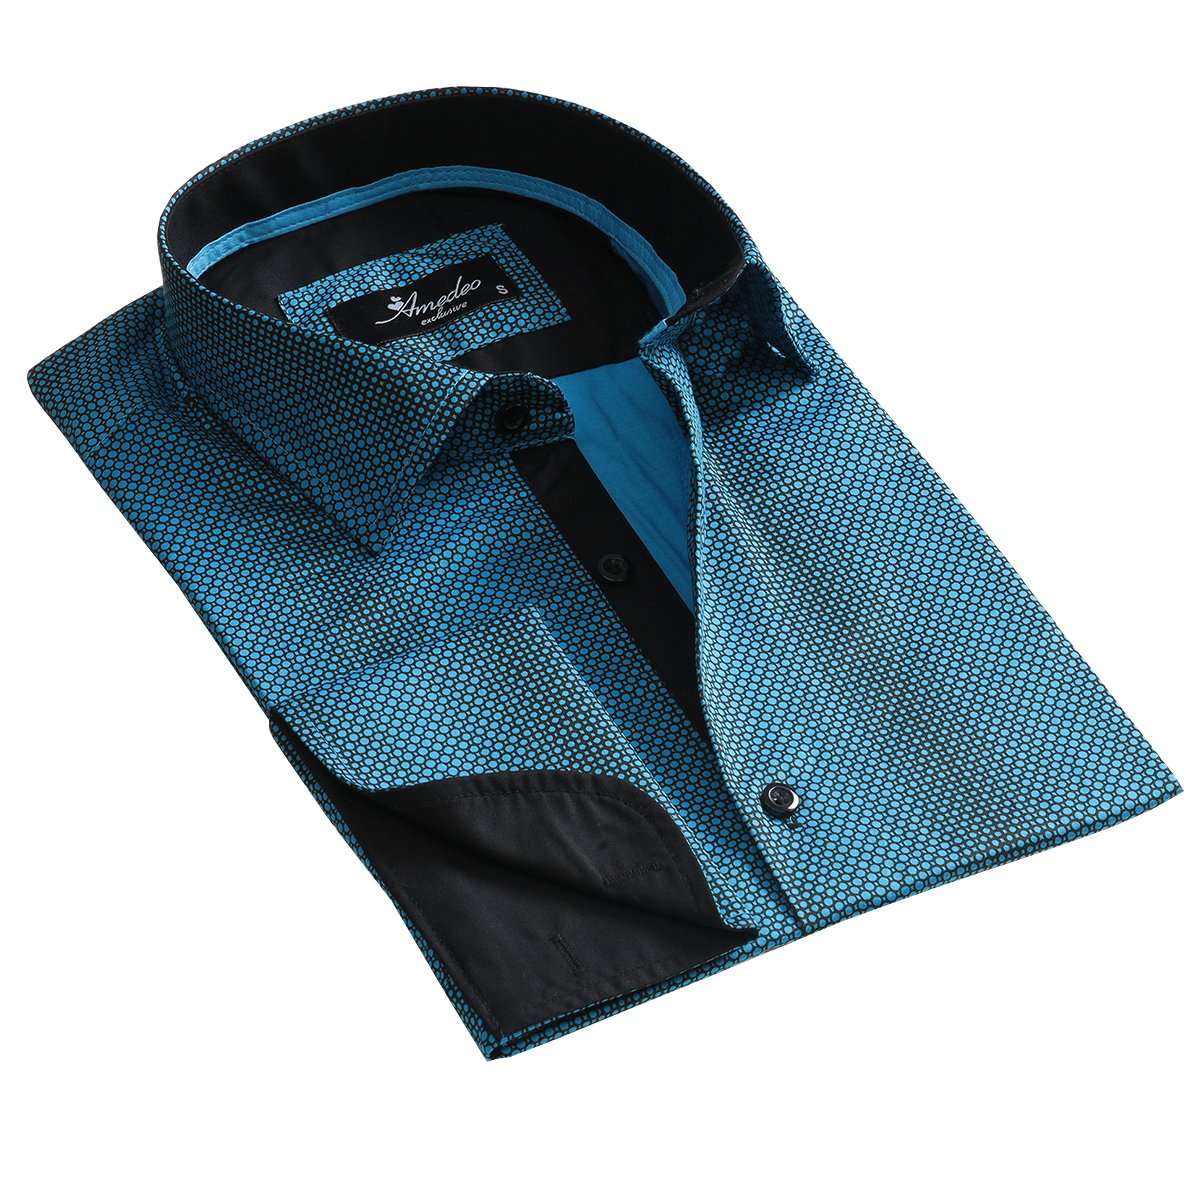 Turquoise Blue Design Mens Slim Fit Designer Dress Shirt - tailored Cotton Shirts for Work and Casual Wear - Amedeo Exclusive